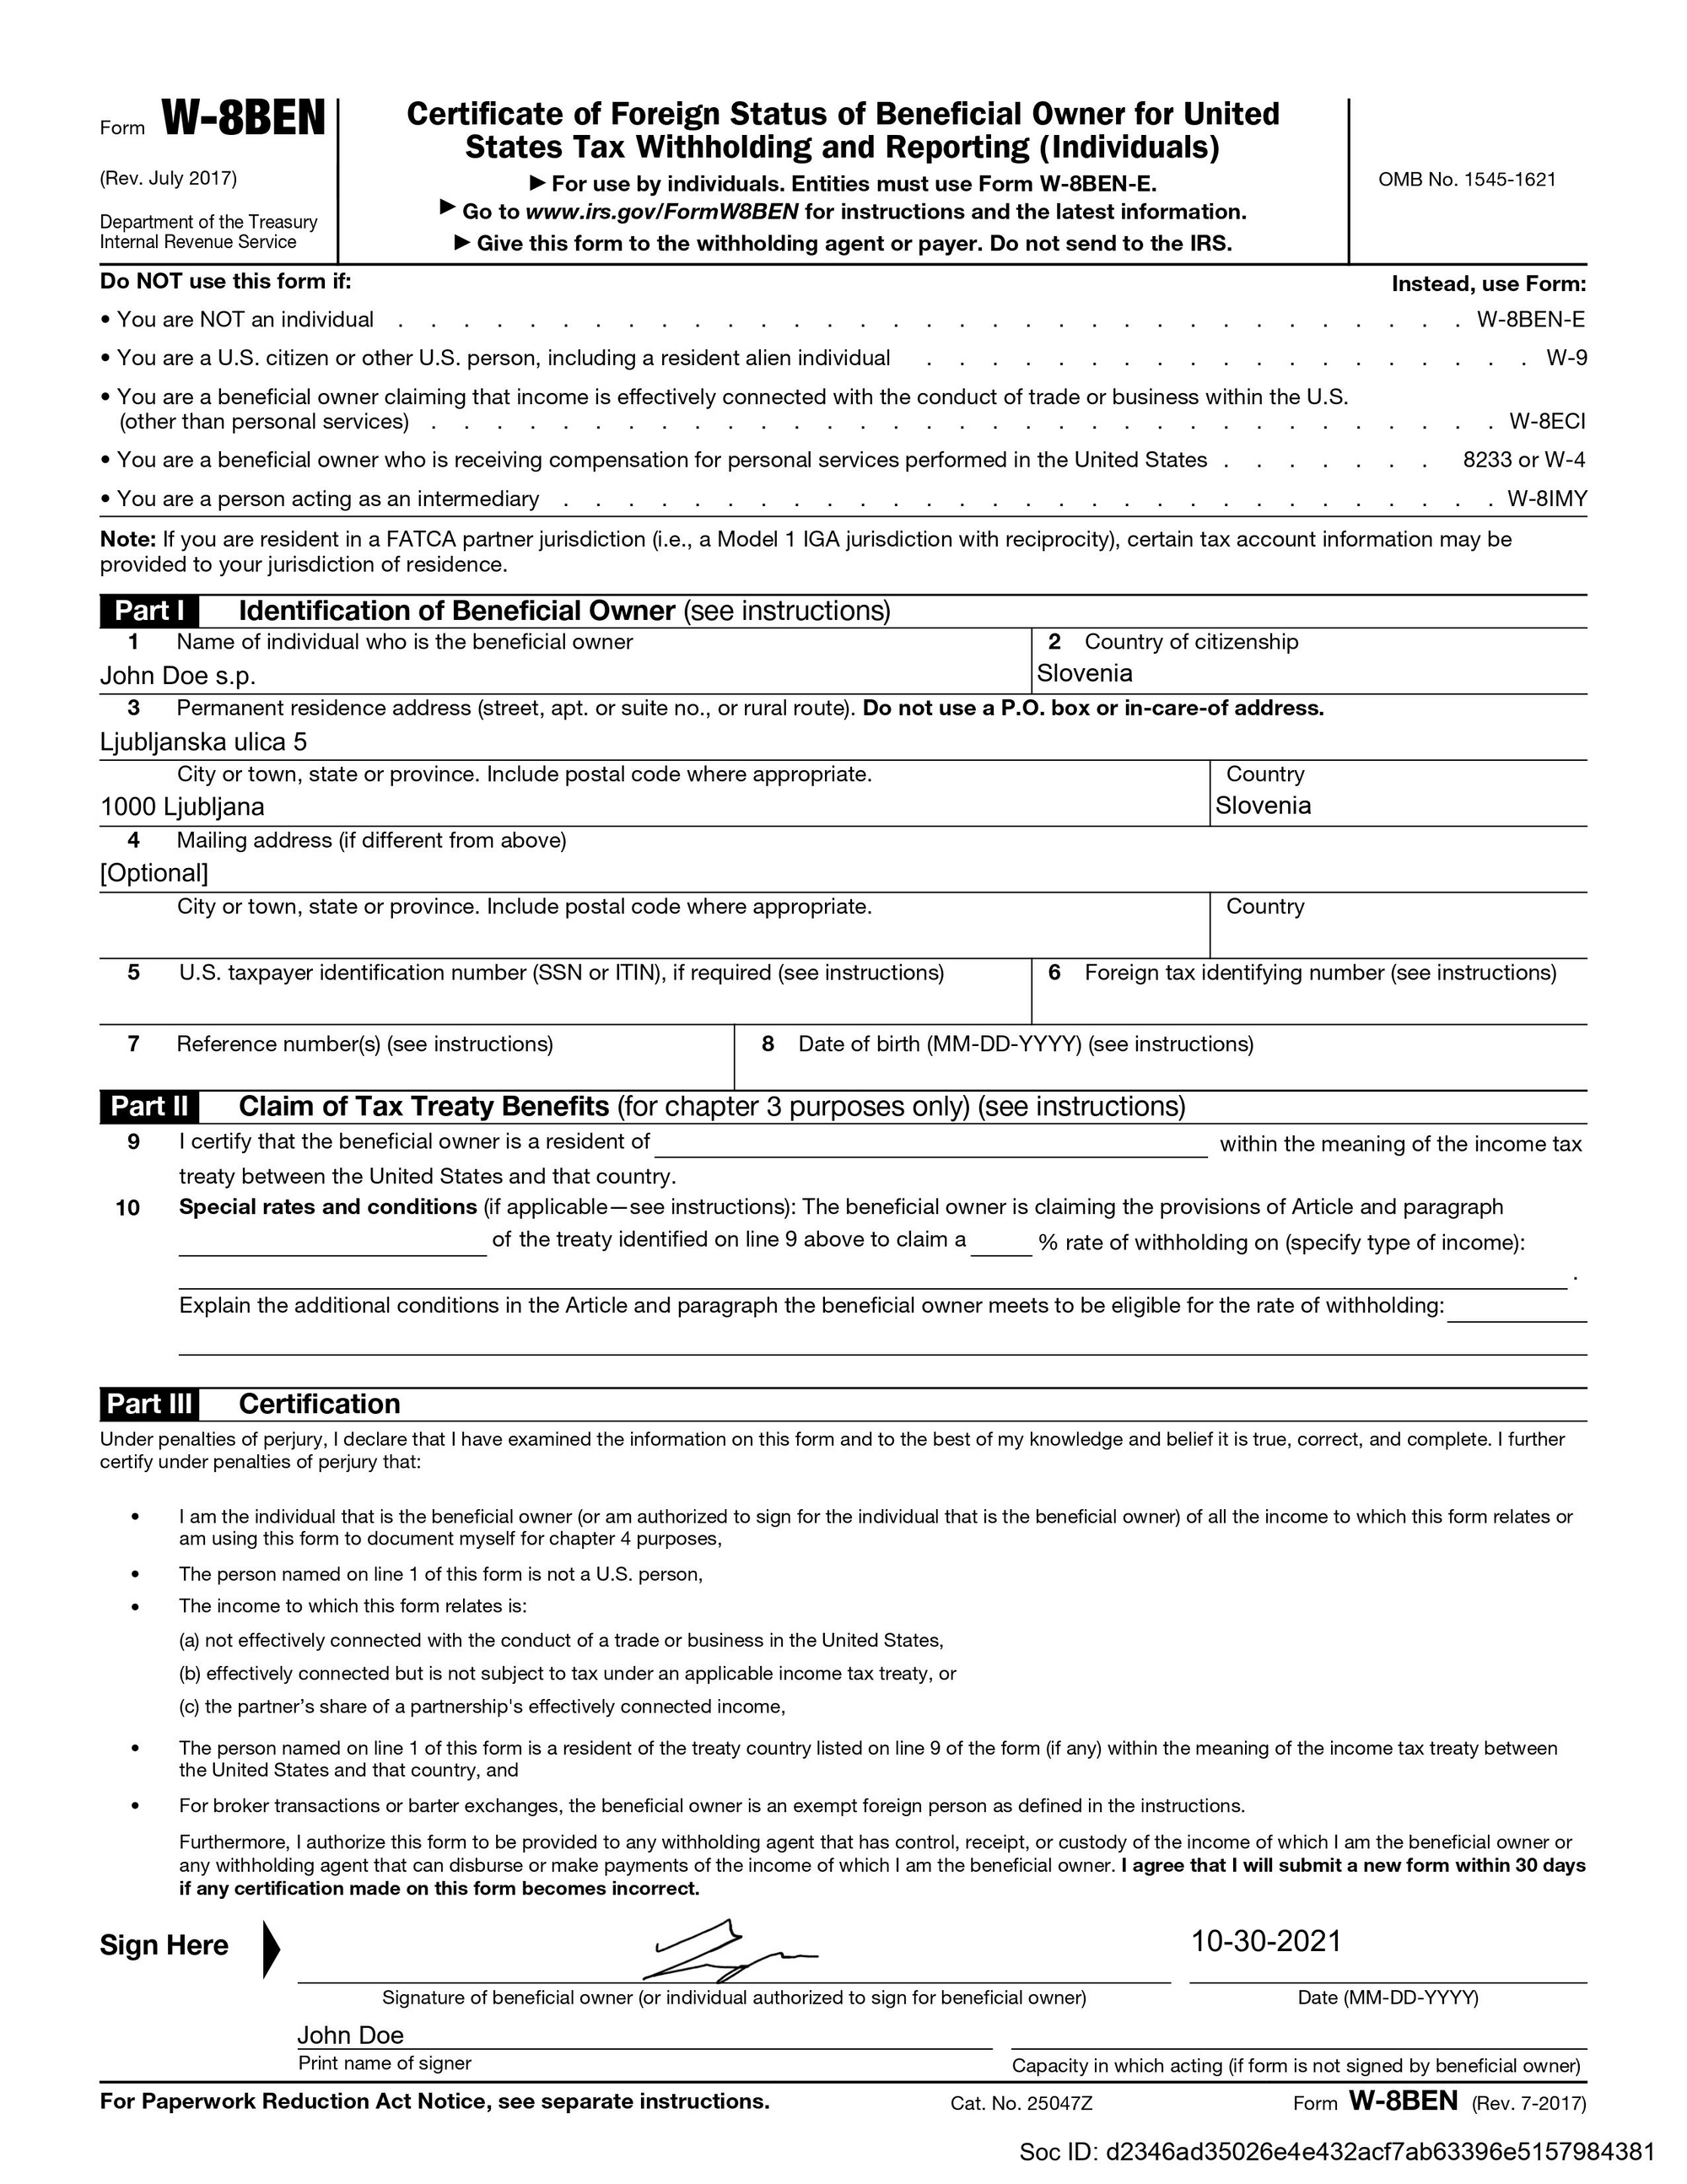 how-should-an-engineer-fill-out-w-8ben-form